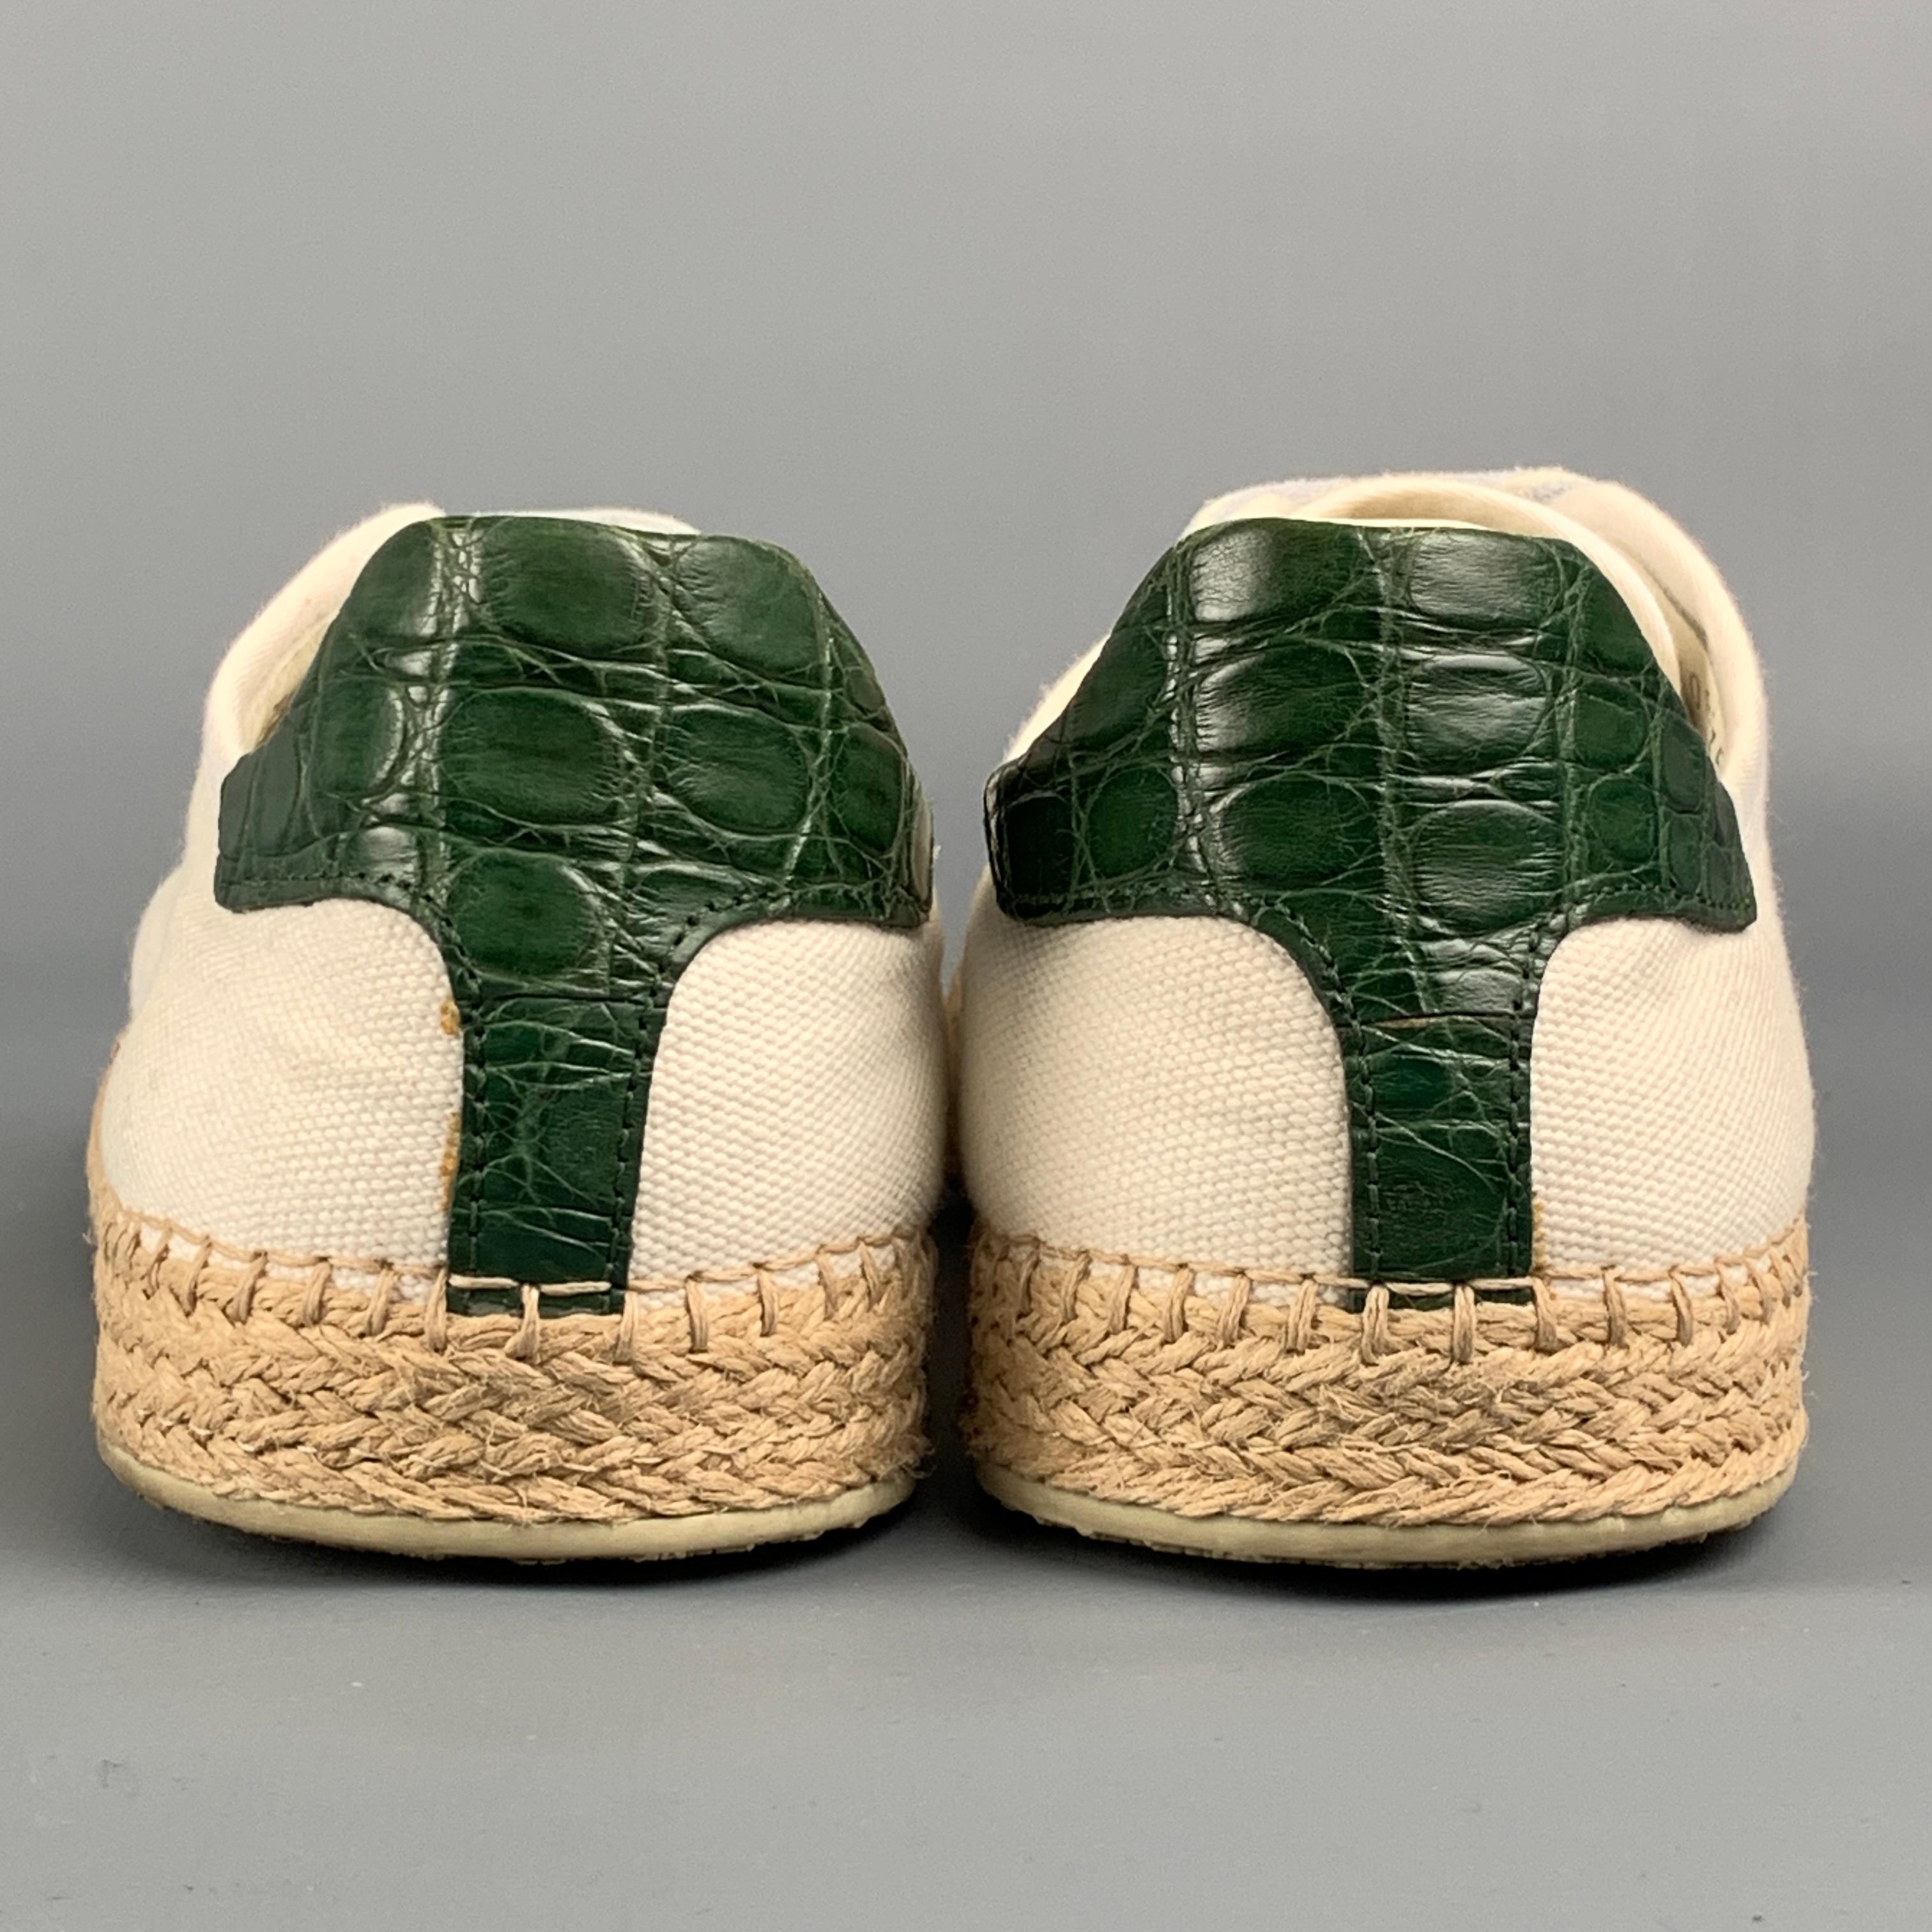 old school gucci sneakers